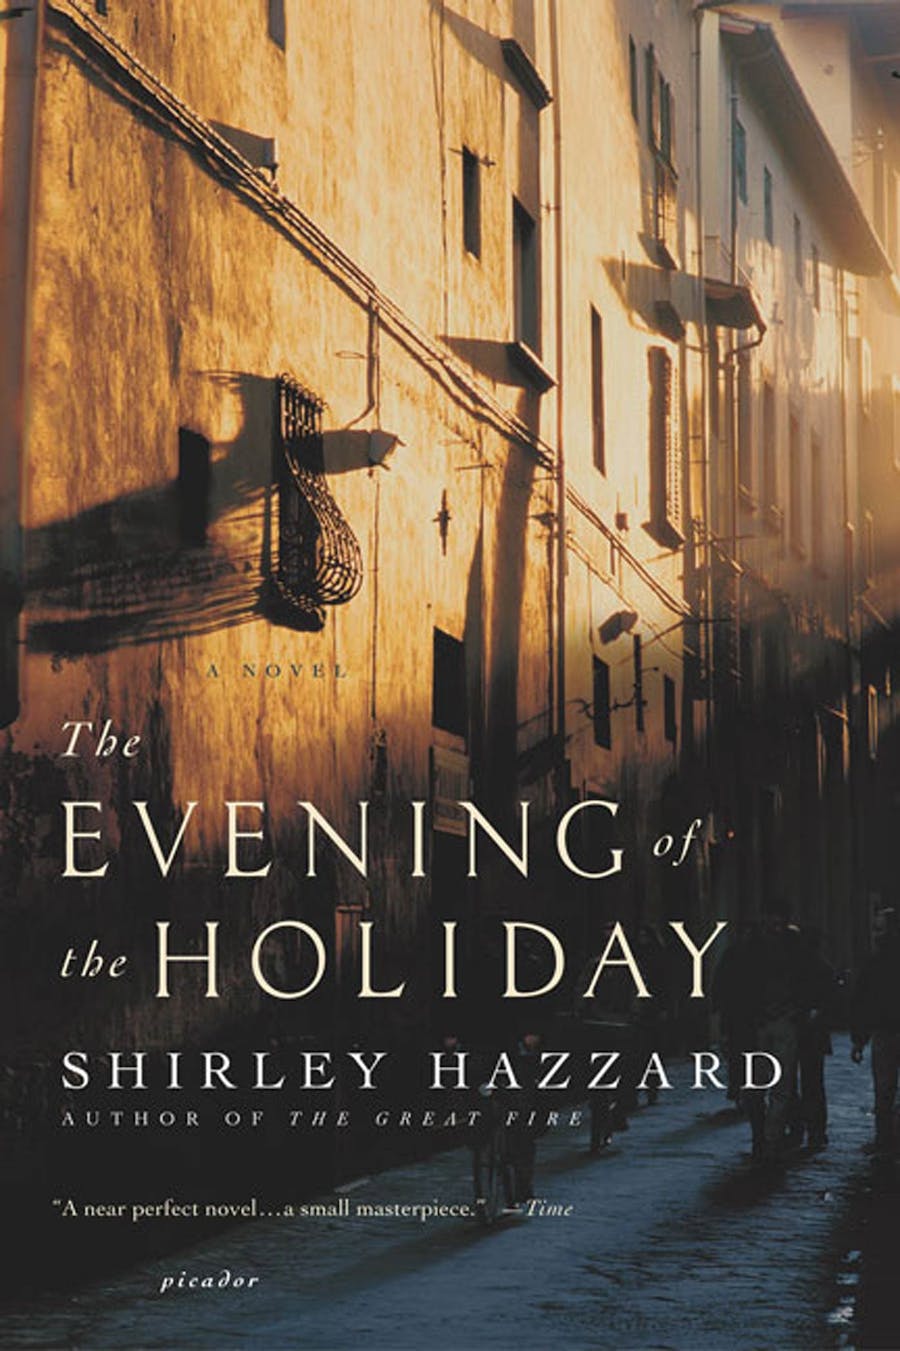 The Evening of the Holiday by Shirley Hazzard